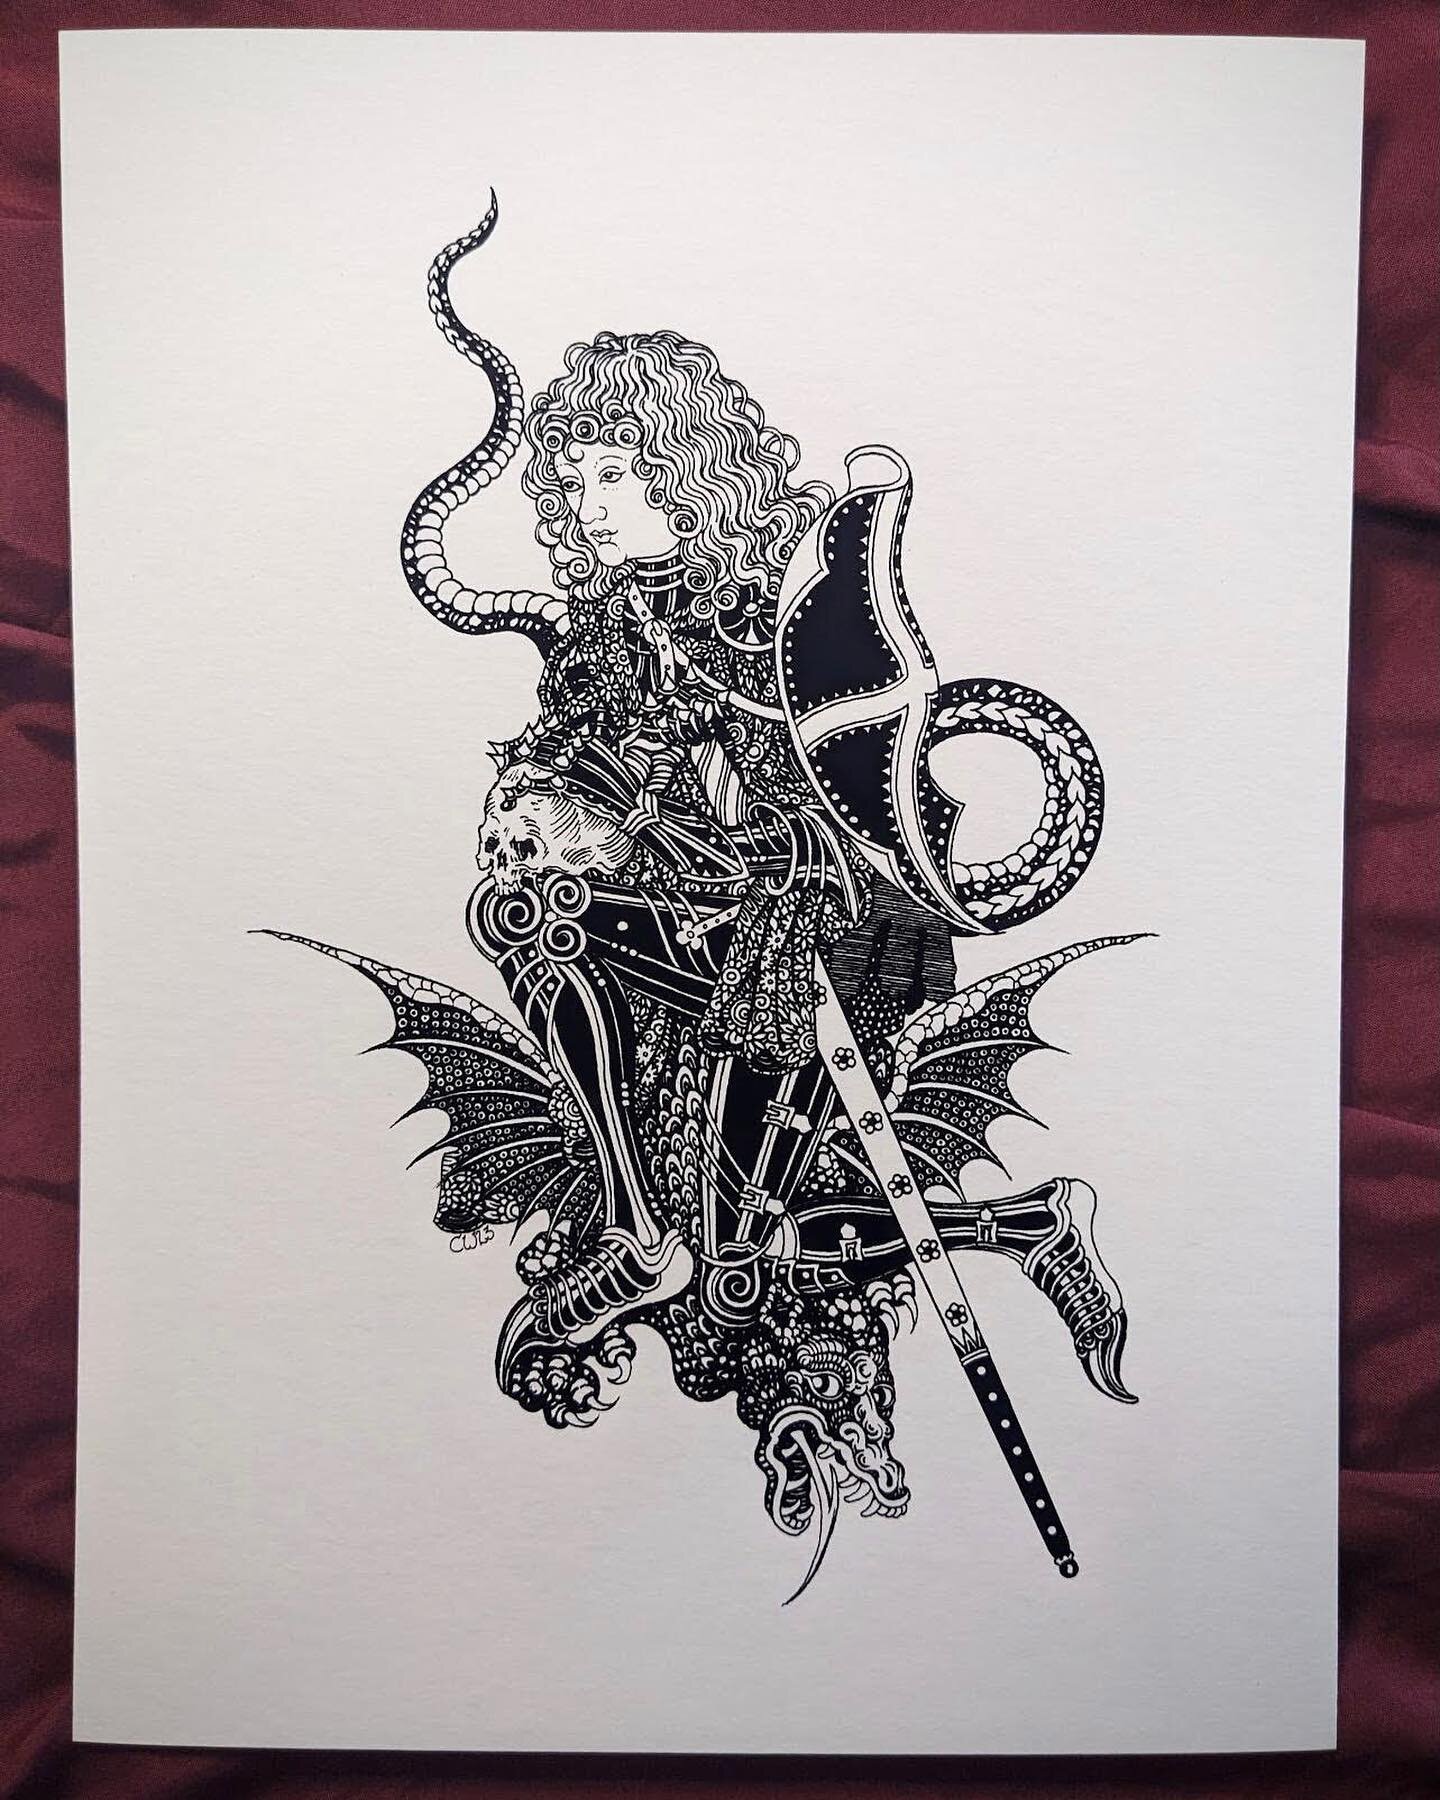 &ldquo;Knight, Death and the Dragon&rdquo; print coming this Thursday! 
🗡🗡🗡
At 2 pm pst I will be adding two new prints to my webstore.

#illustration #darkartist #darkartists #linework #iblackwork #blackwork #engraving #medievalart #medieval #alb